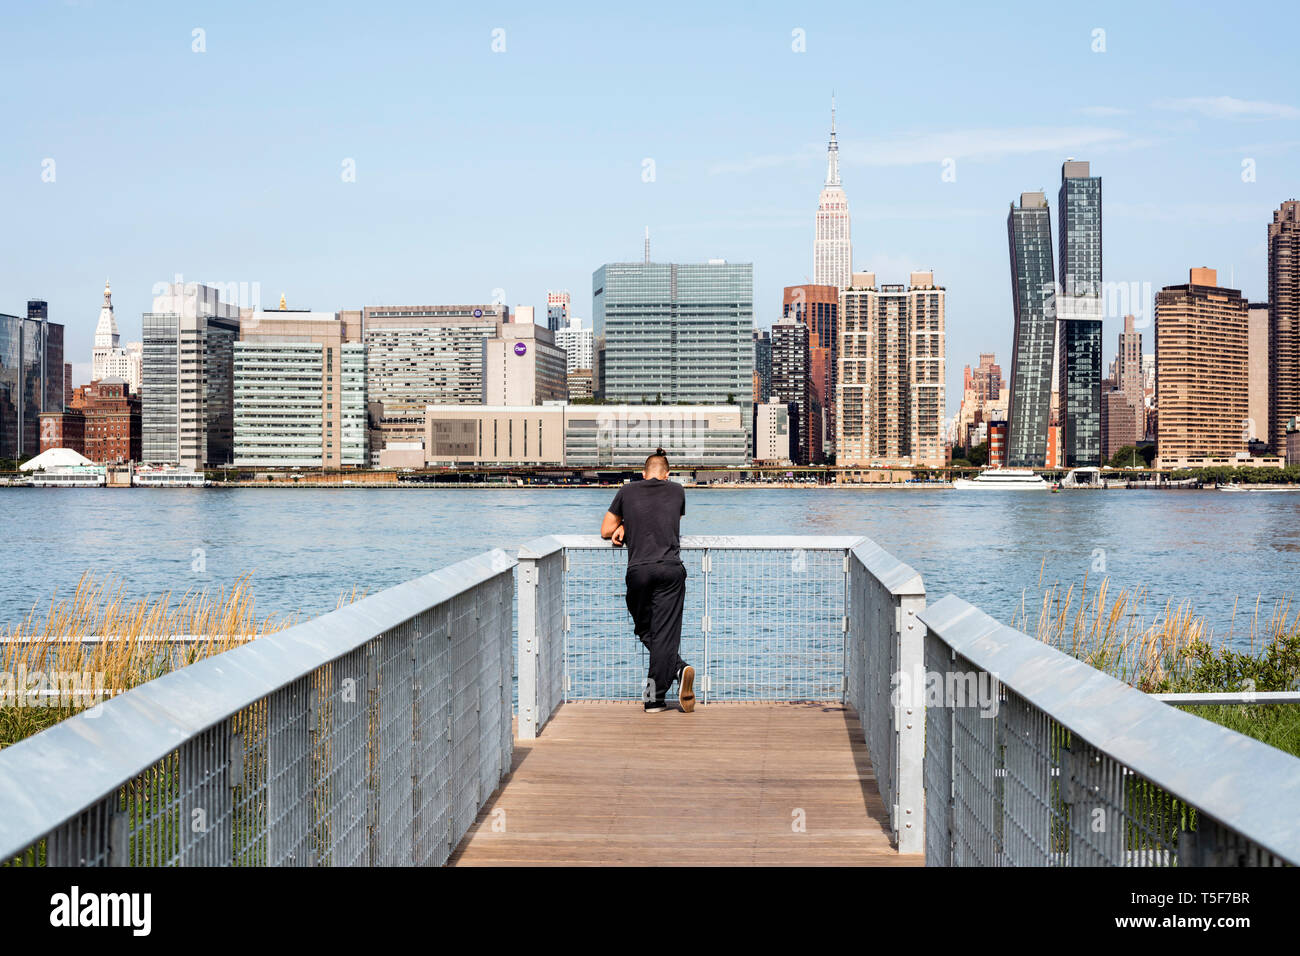 Visitor on a bridge over the wetlands, overlooking the East River and Midtown Manhattan. Hunters Point South Park, New York, United States. Architect: Stock Photo